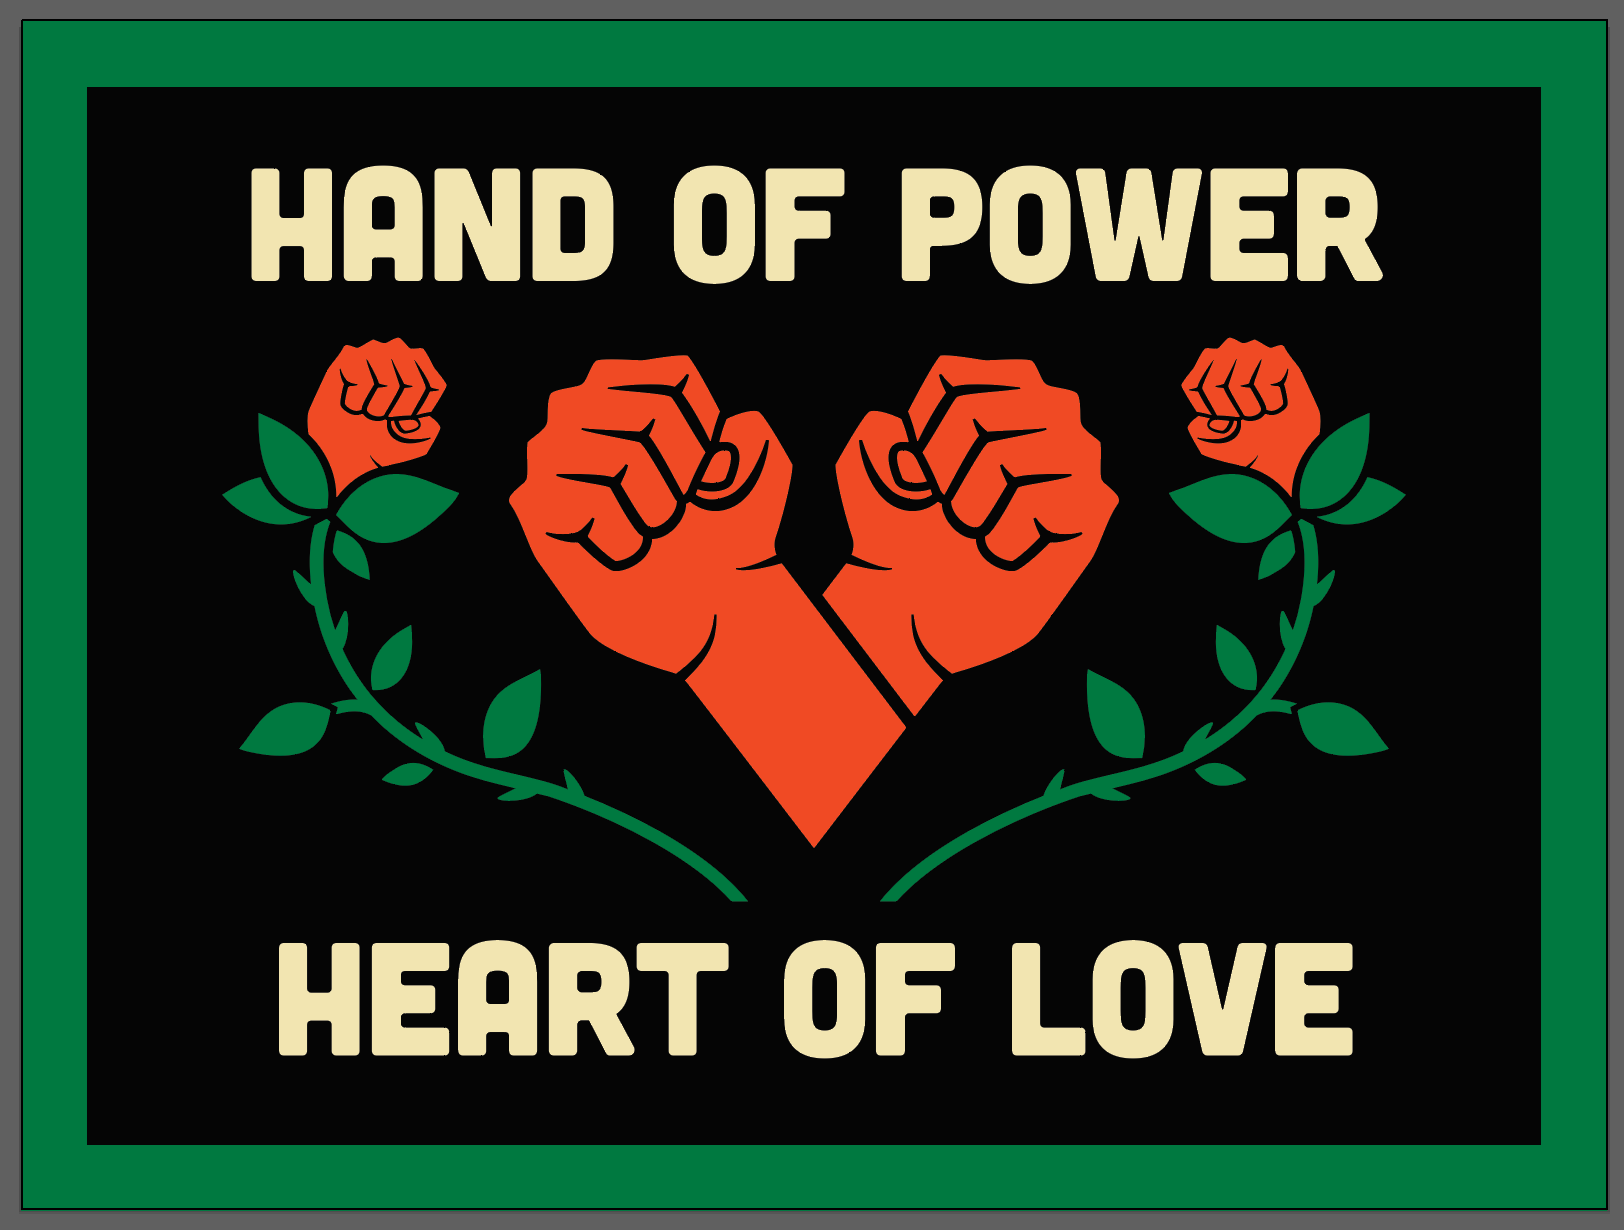 Large banner with black background and green border with words “Hand of Power, Heart of Love” on it. In center are two red fists in the shape of a heart.